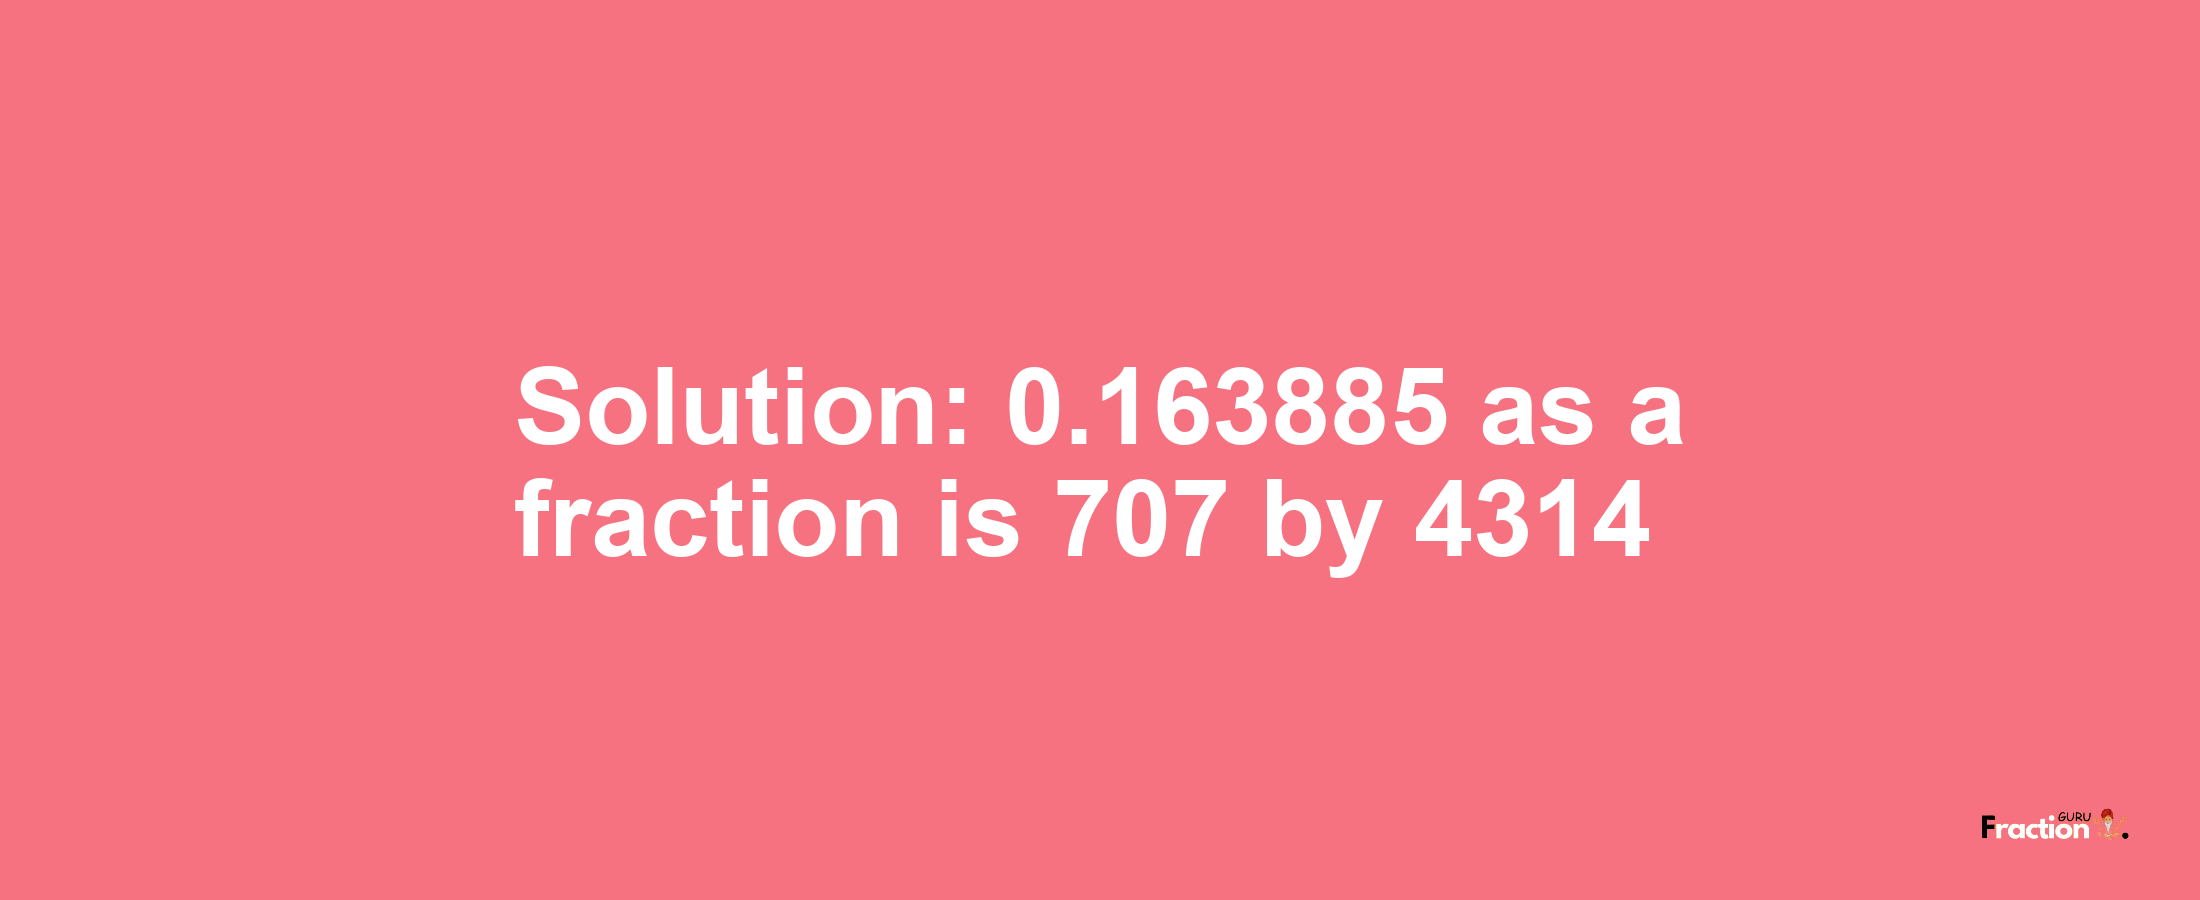 Solution:0.163885 as a fraction is 707/4314